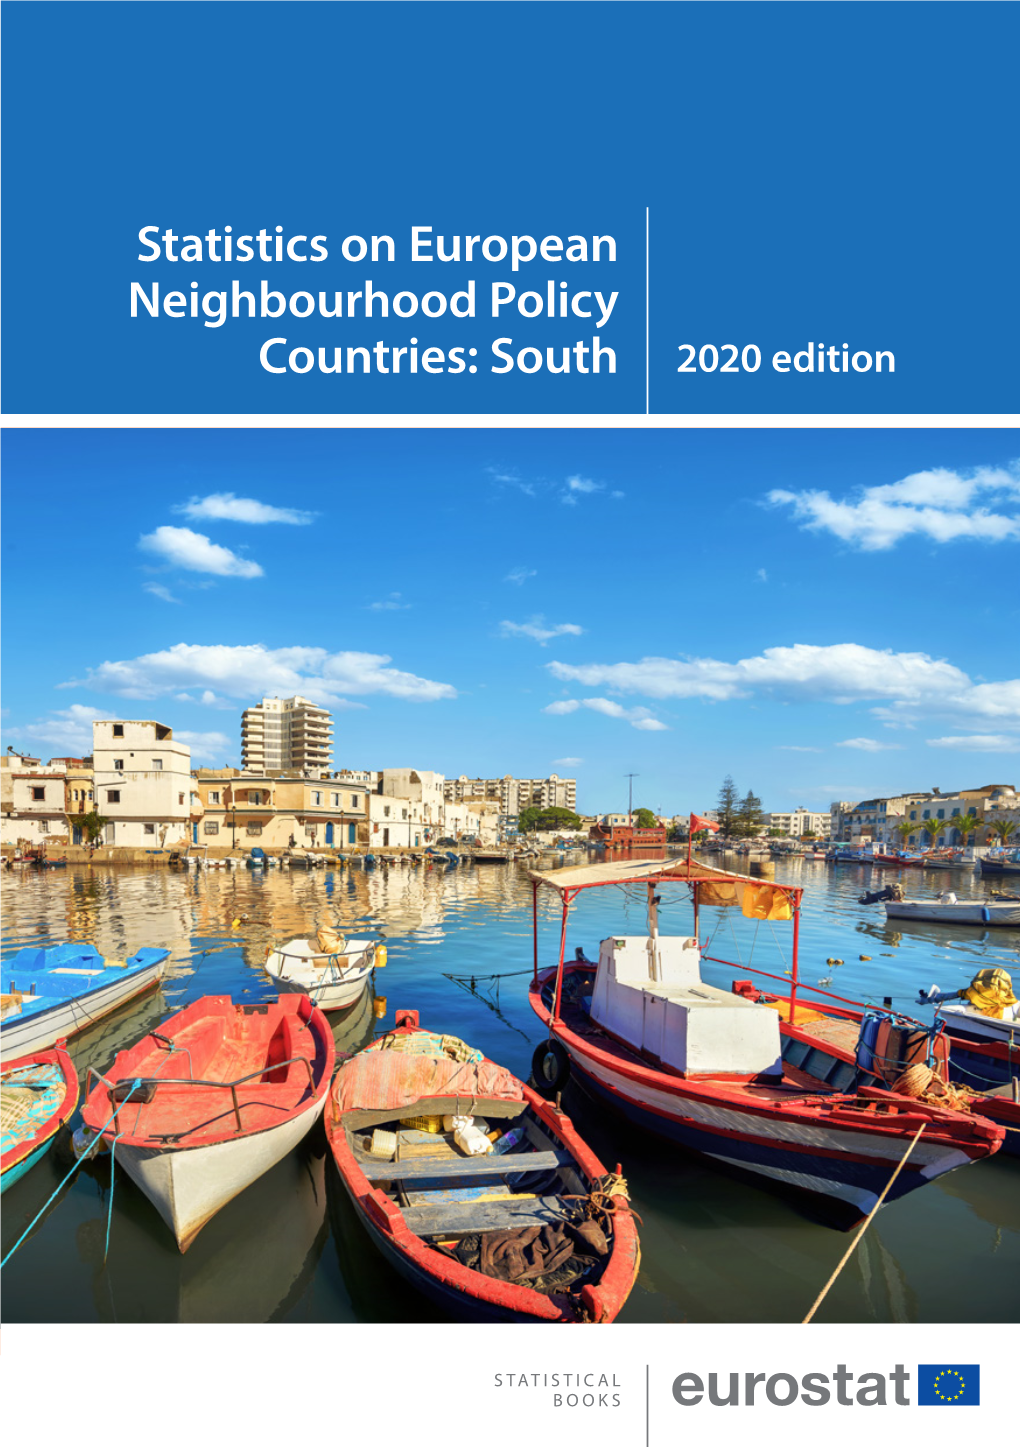 Statistics on European Neighbourhood Policy Countries: South 2020 Edition